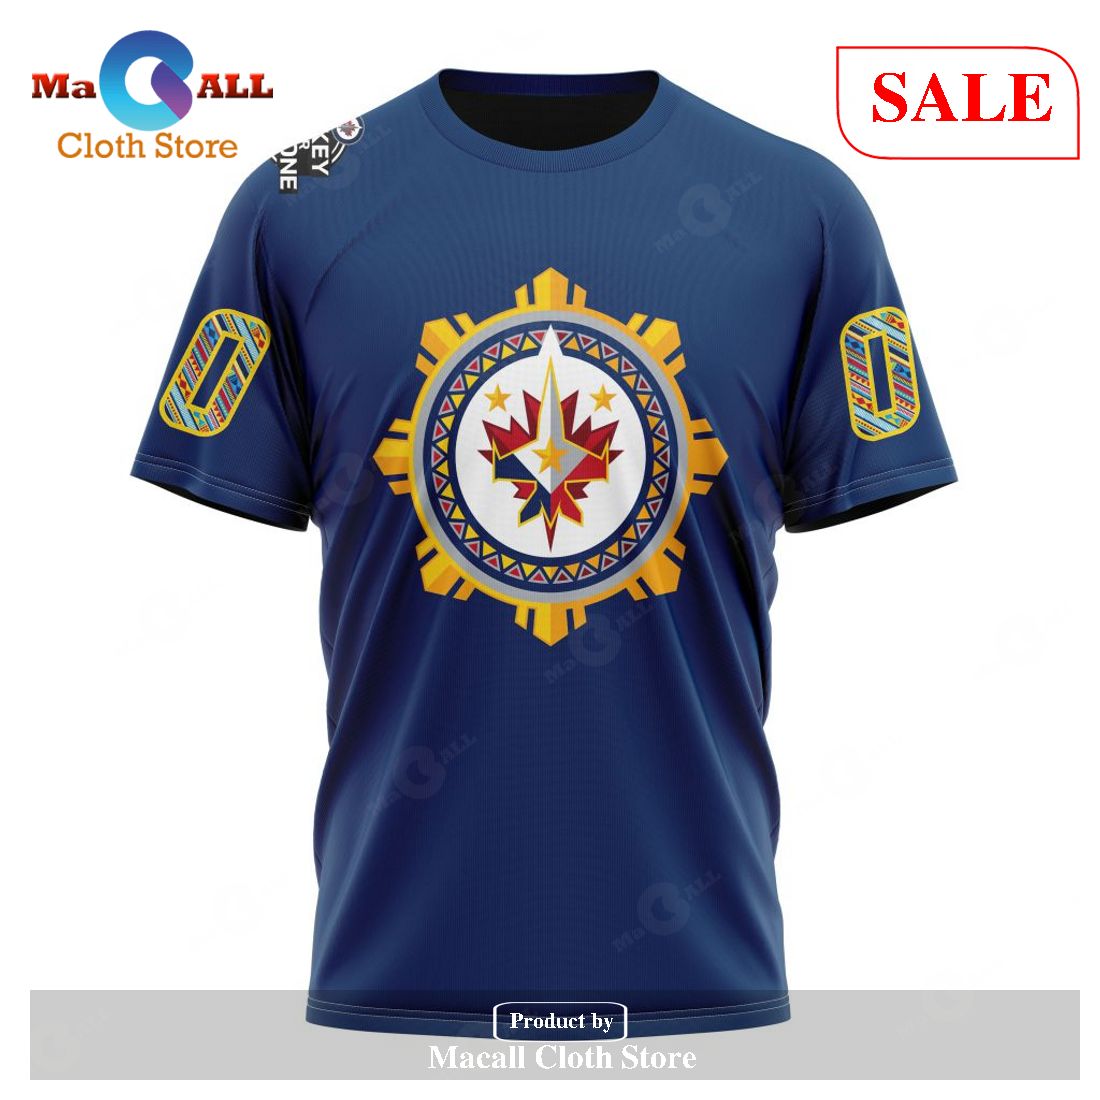 Winnipeg Jets - The Filipino Heritage Night Jersey auction is LIVE! Funds  raised will support Filipino youth initiatives in the community, including  the CREATE program at Sisler High School! 🇵🇭 BID ▶️